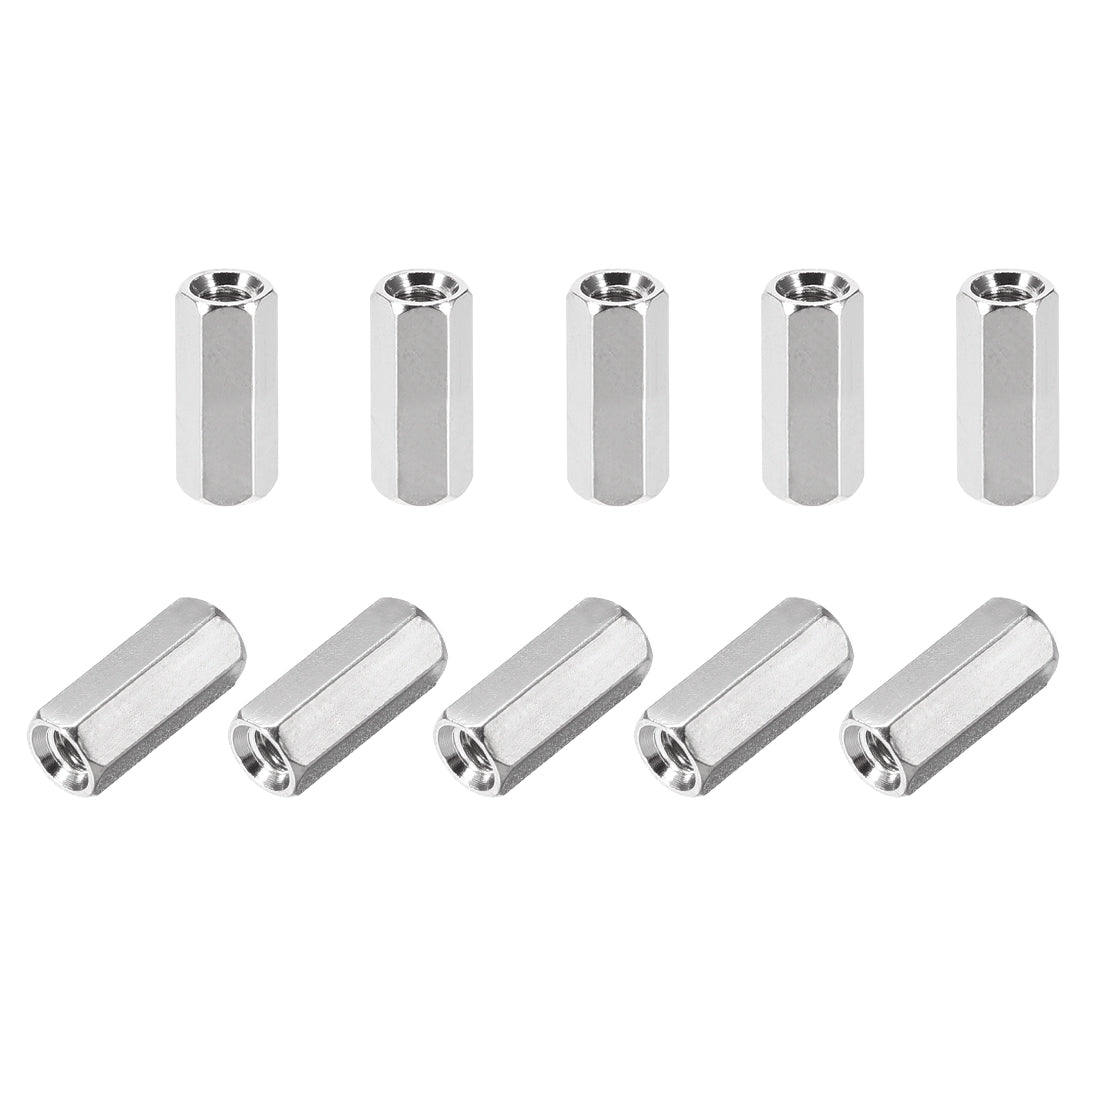 Uxcell Uxcell M3 x 45mm Female to Female Hex Nickel Plated Spacer Standoff 10pcs